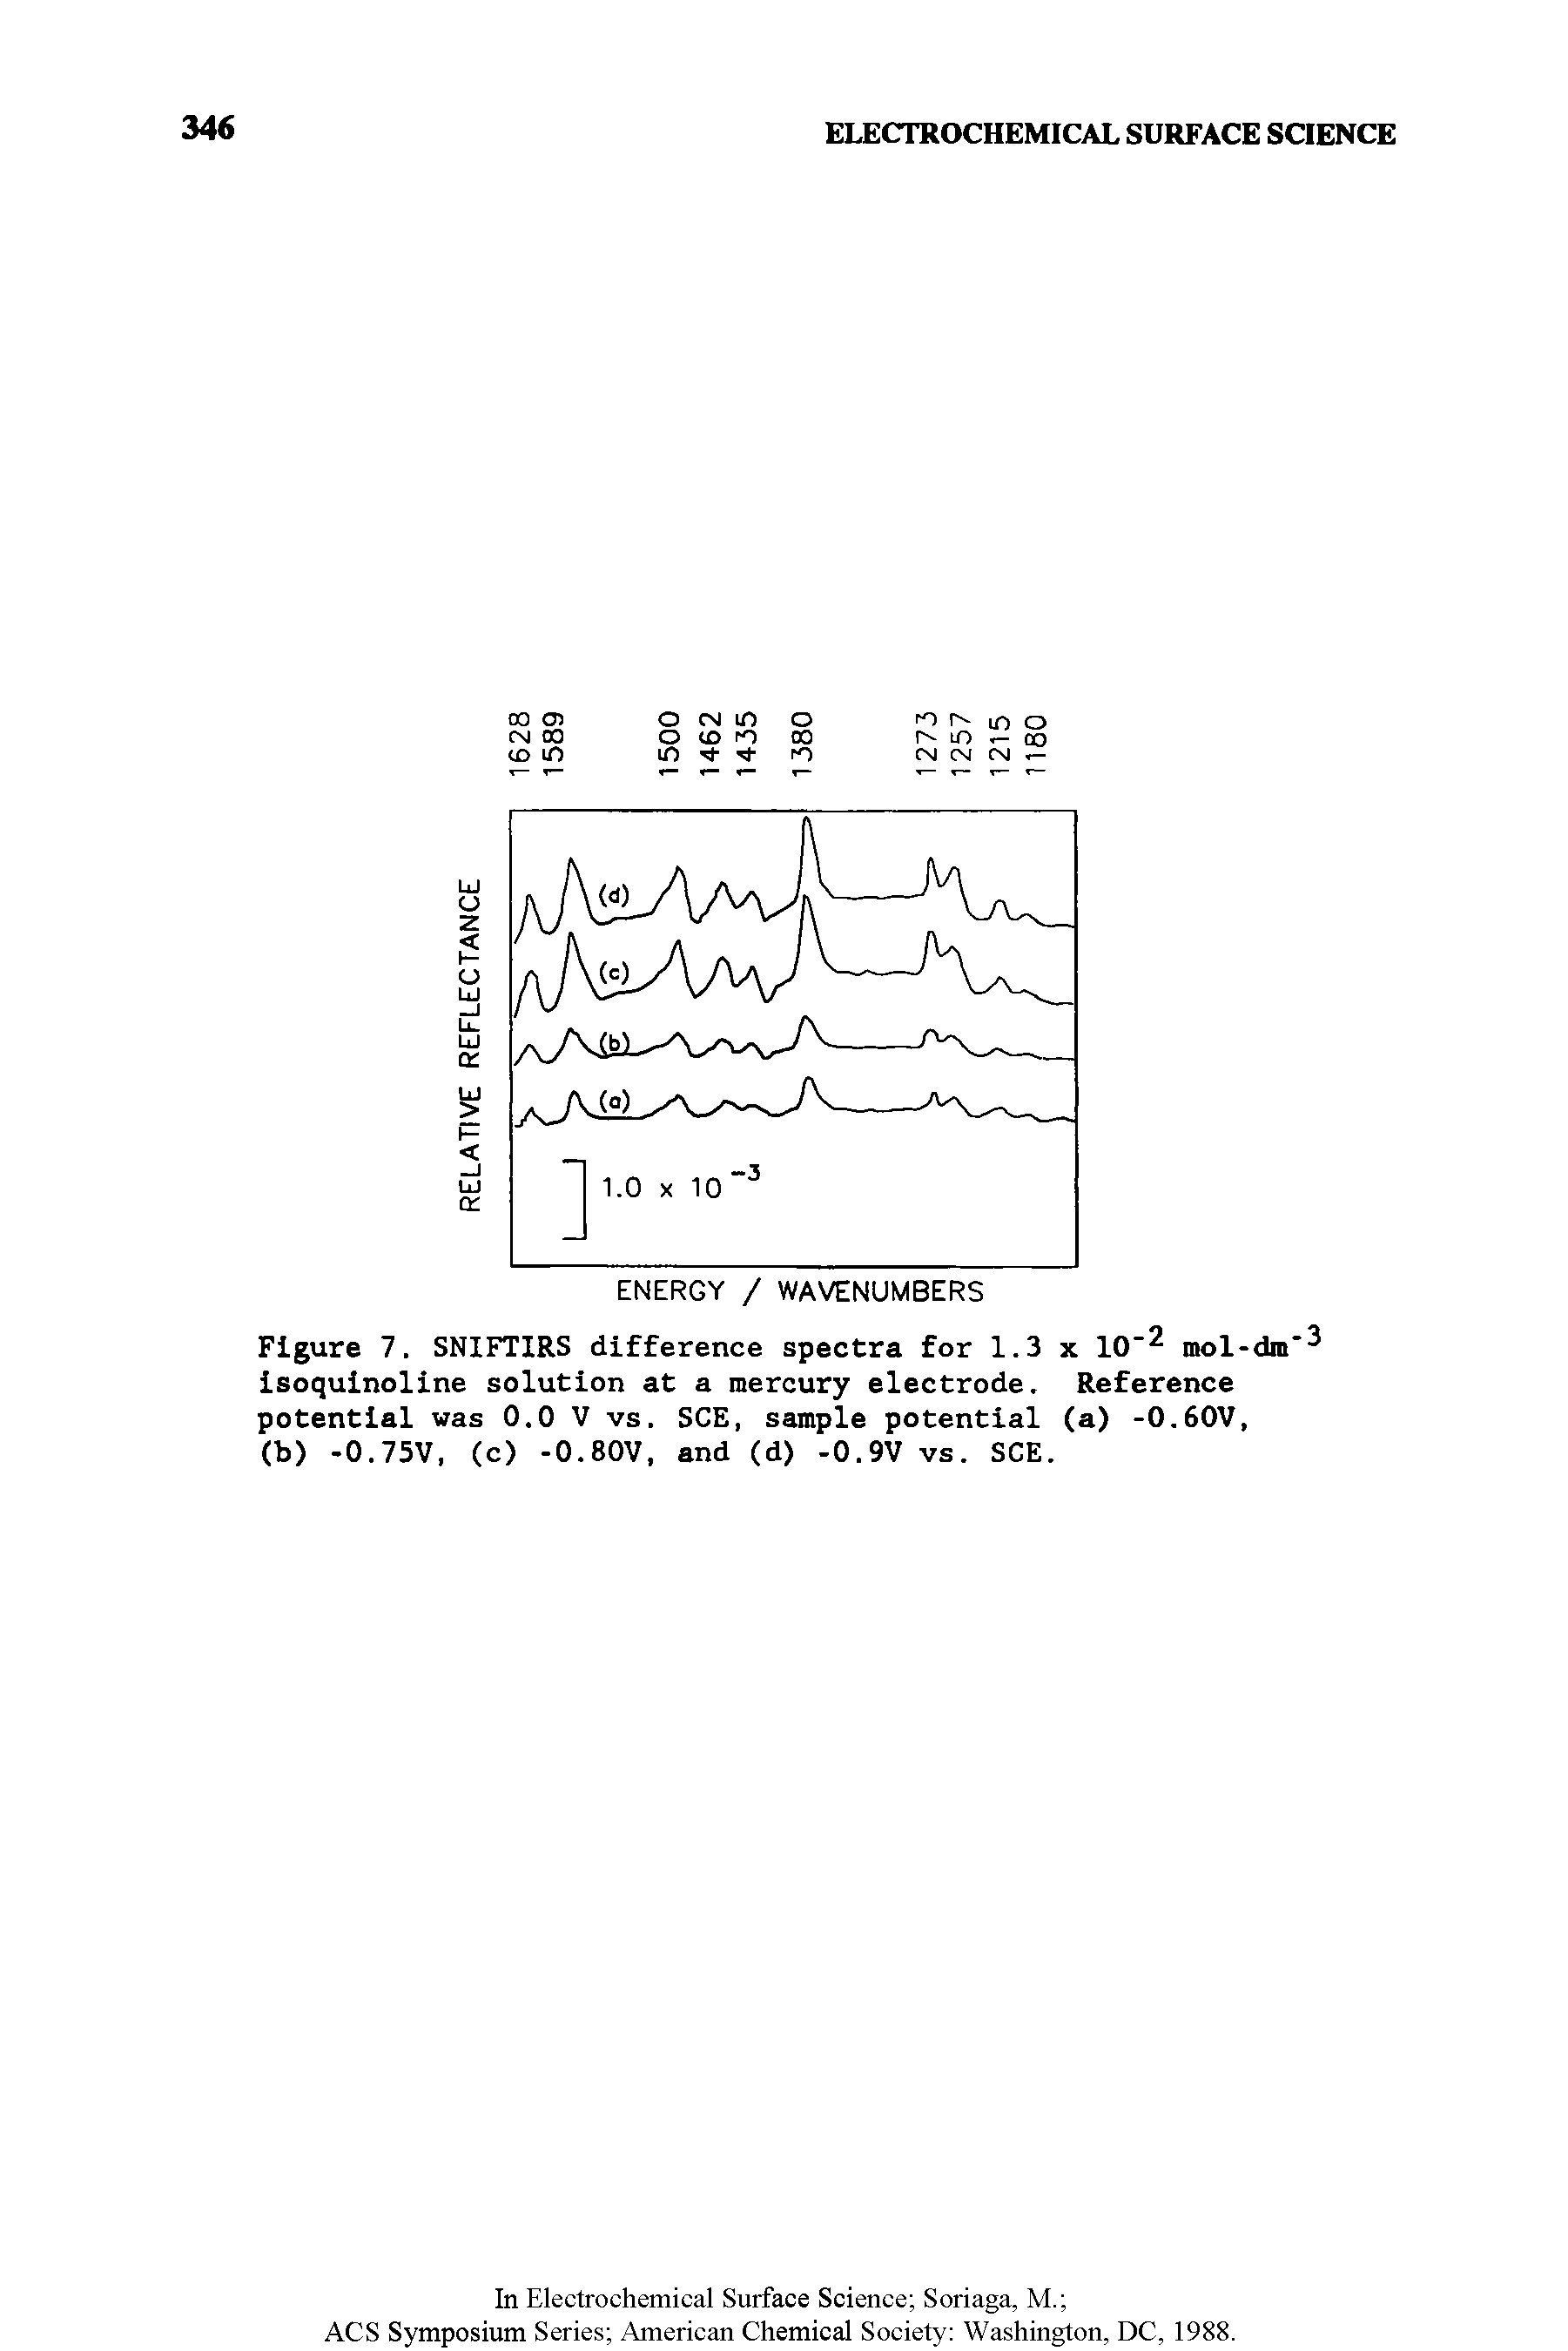 Figure 7. SNIFTIRS difference spectra for 1.3 x 10" mol-dm" isoquinoline solution at a mercury electrode. Reference potential was 0.0 V vs. SCE, sample potential (a) -0.60V,...